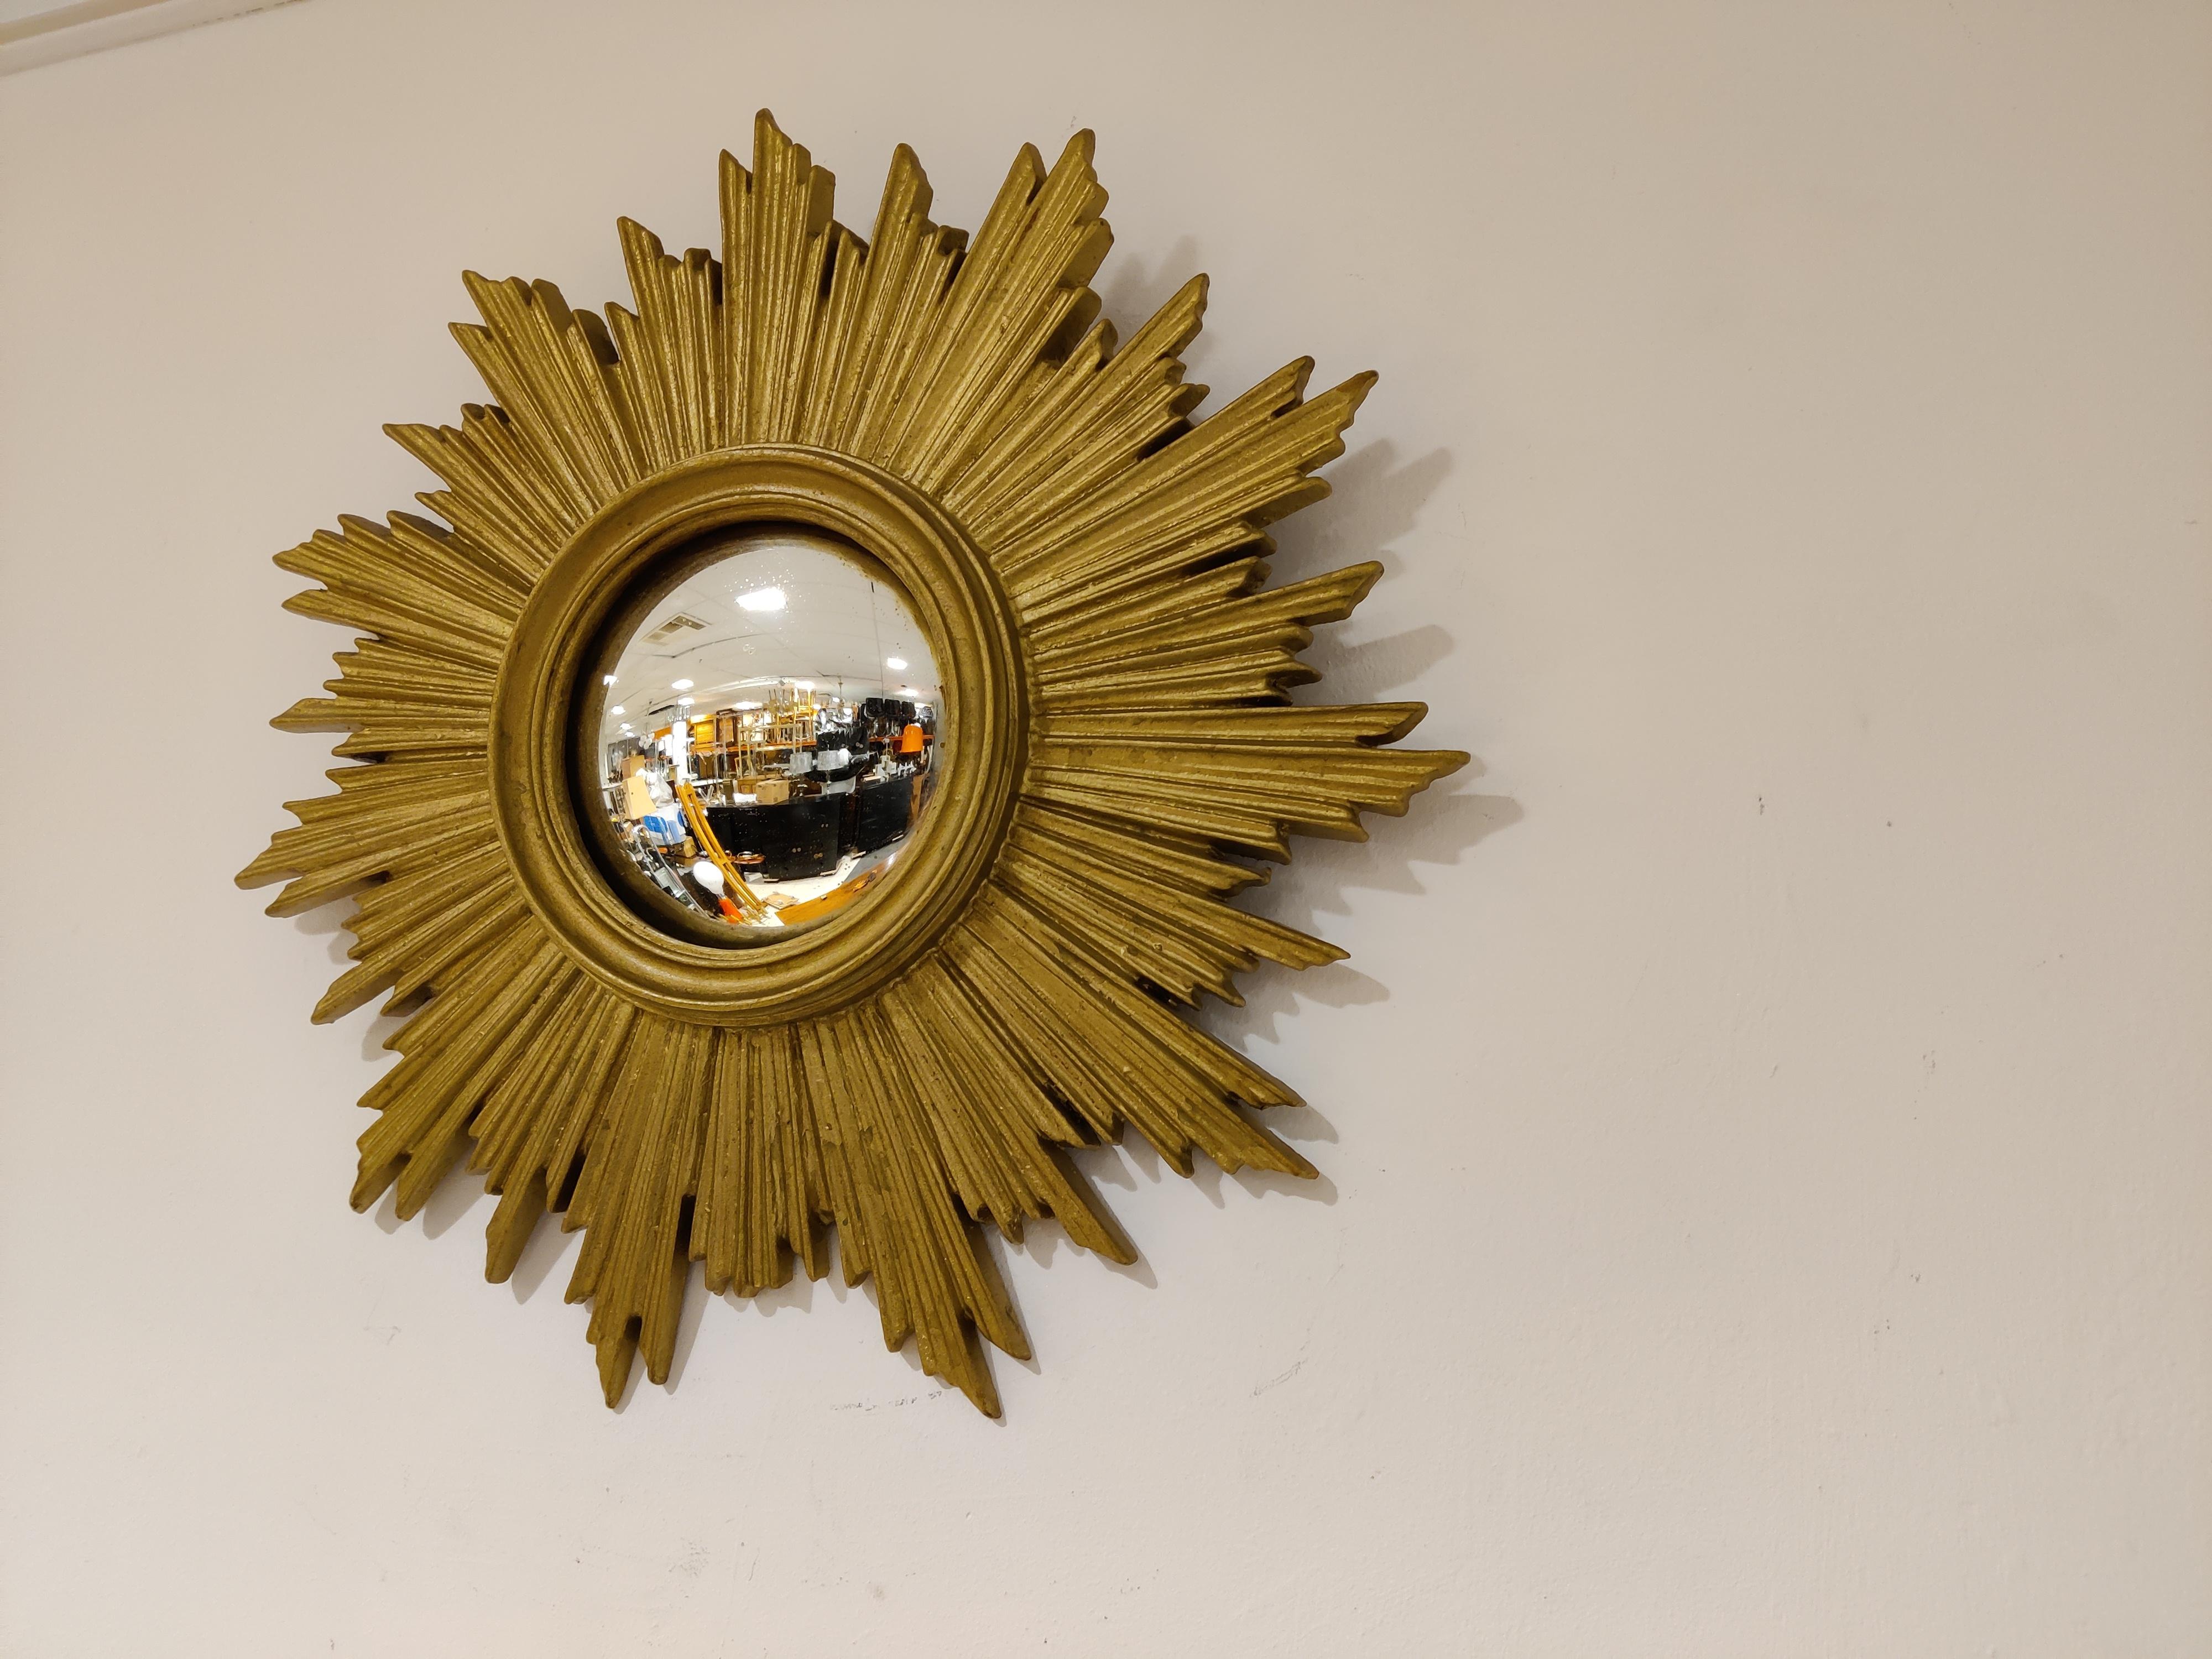 Gilded resin sunburst mirror with convex mirror glass.

The golden mirror is in a good overall condition with one small damage which is not very disturbing.

Beautiful eye catching mirror.

1960s - Belgium

Dimensions:

Diameter: